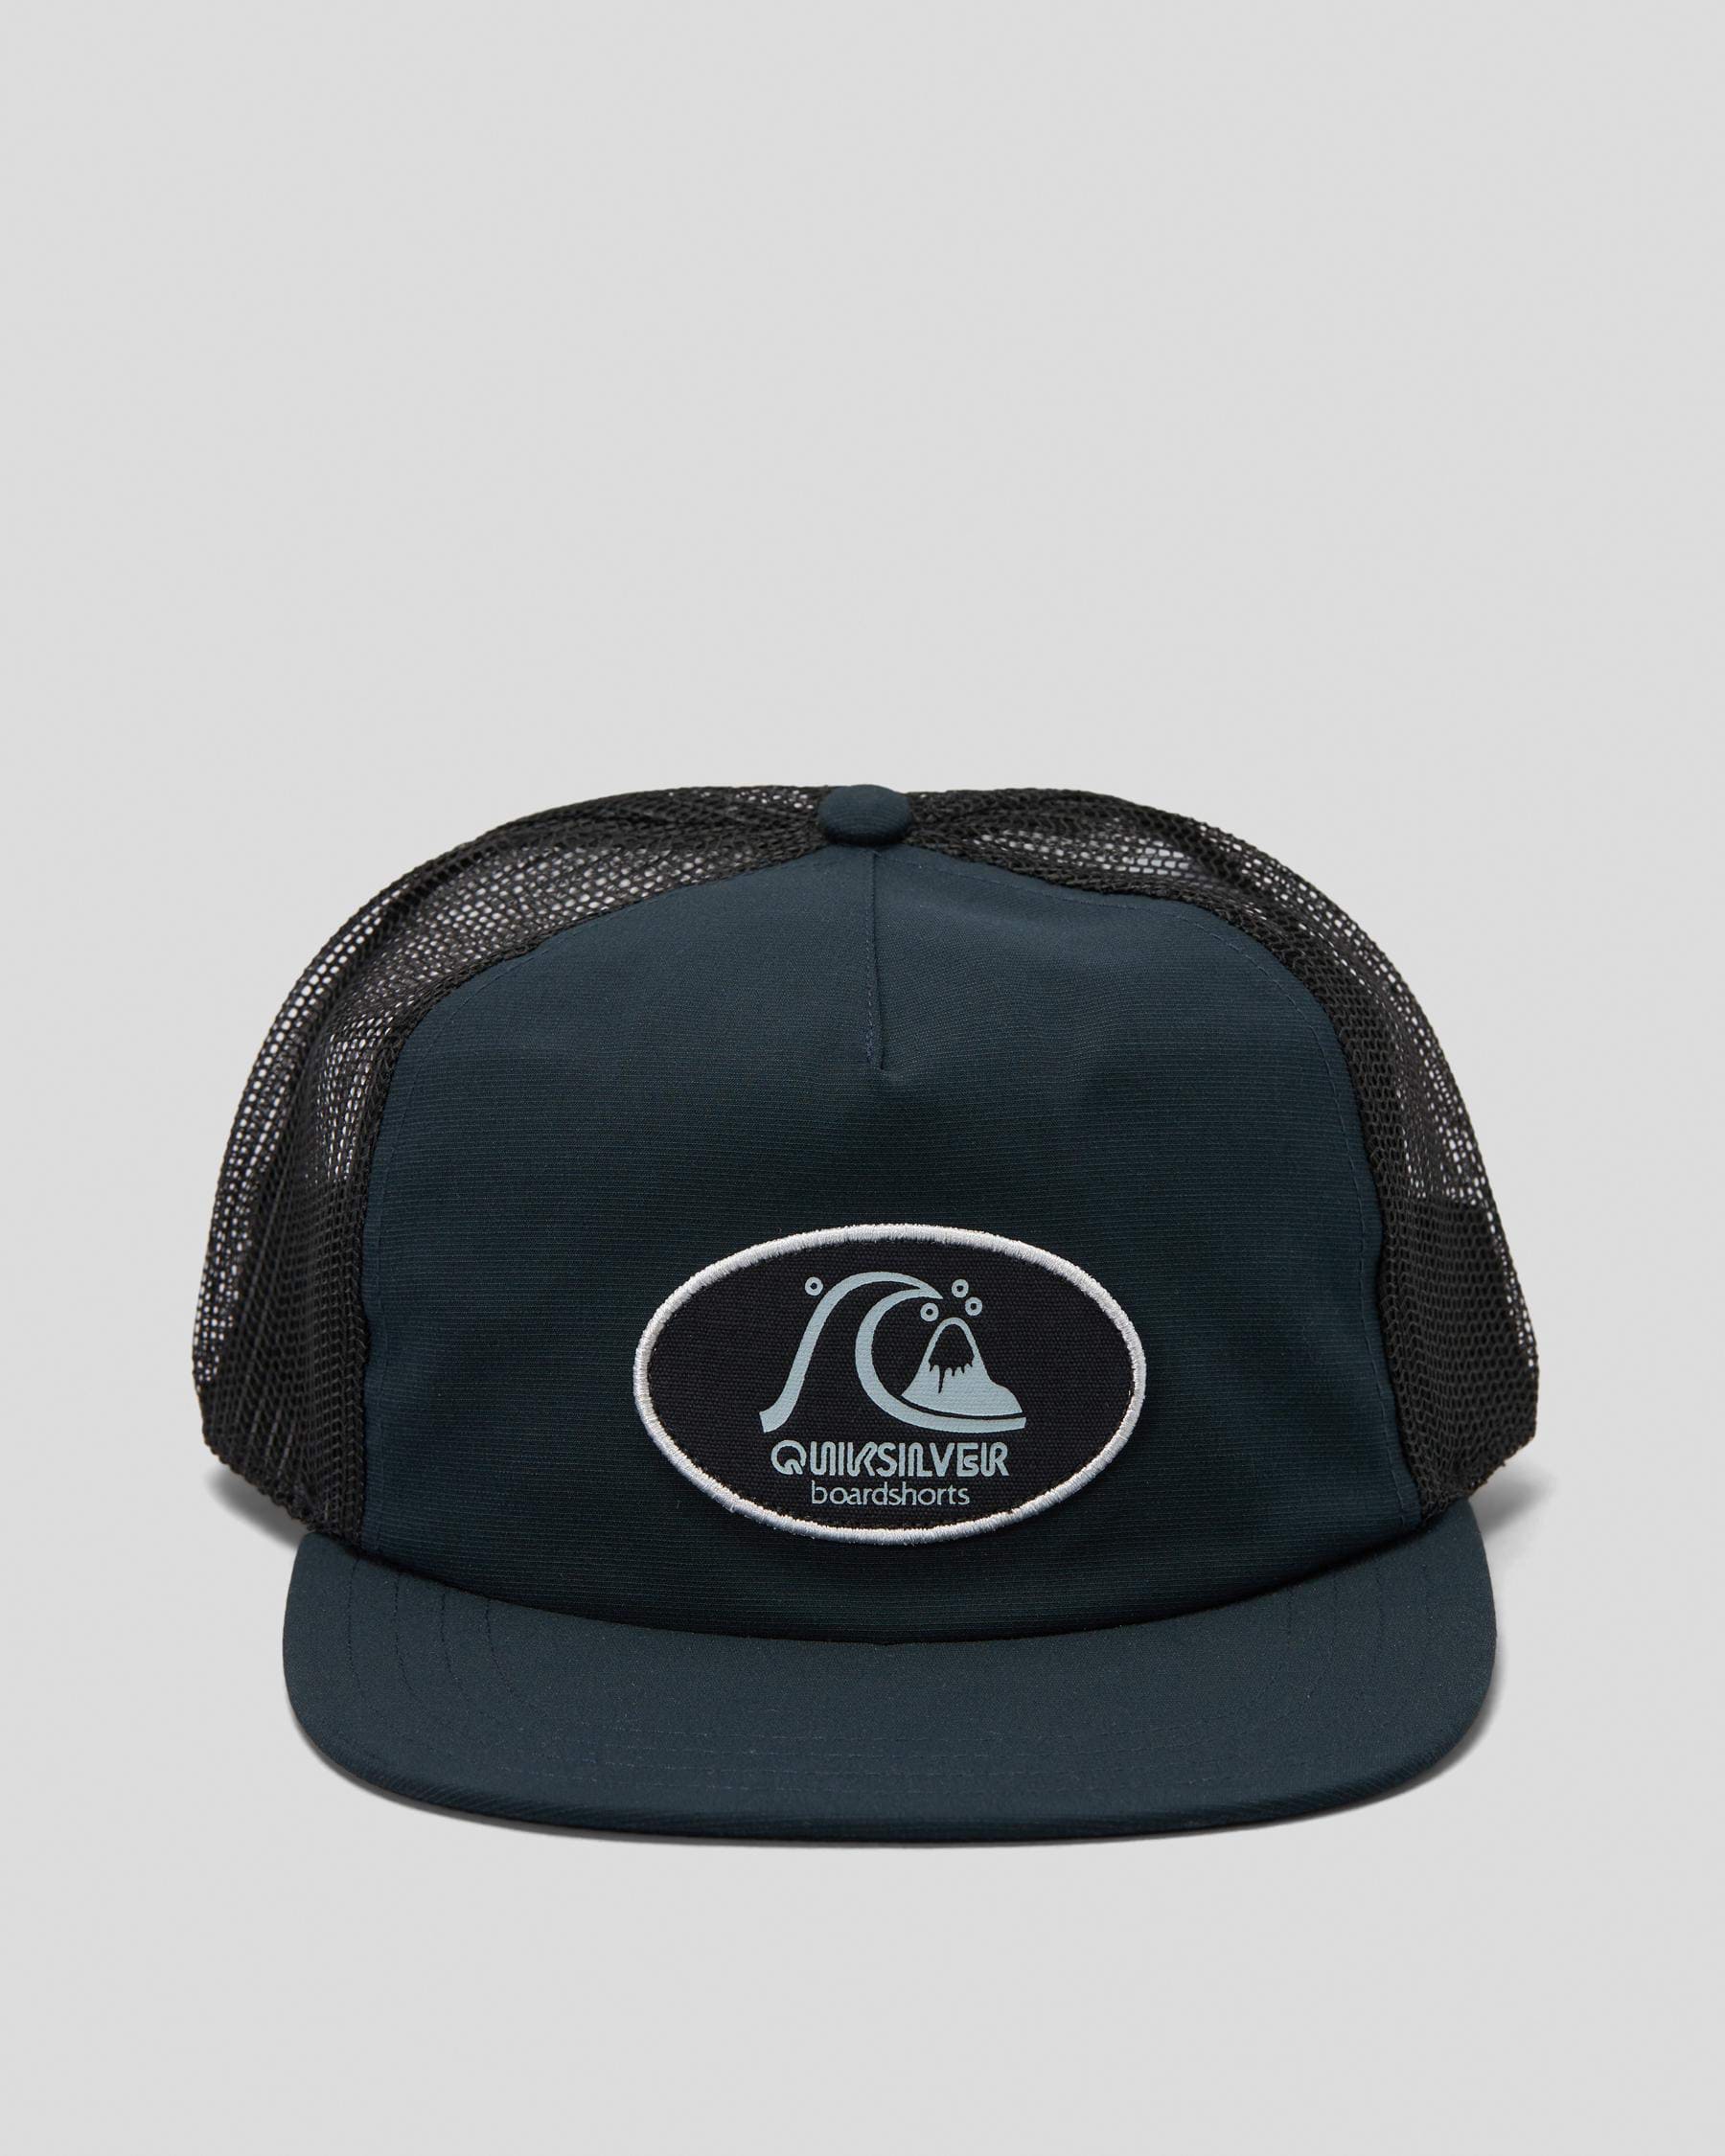 Quiksilver Originals Trucker In States City Black Returns - - Shipping United & Beach Easy FREE